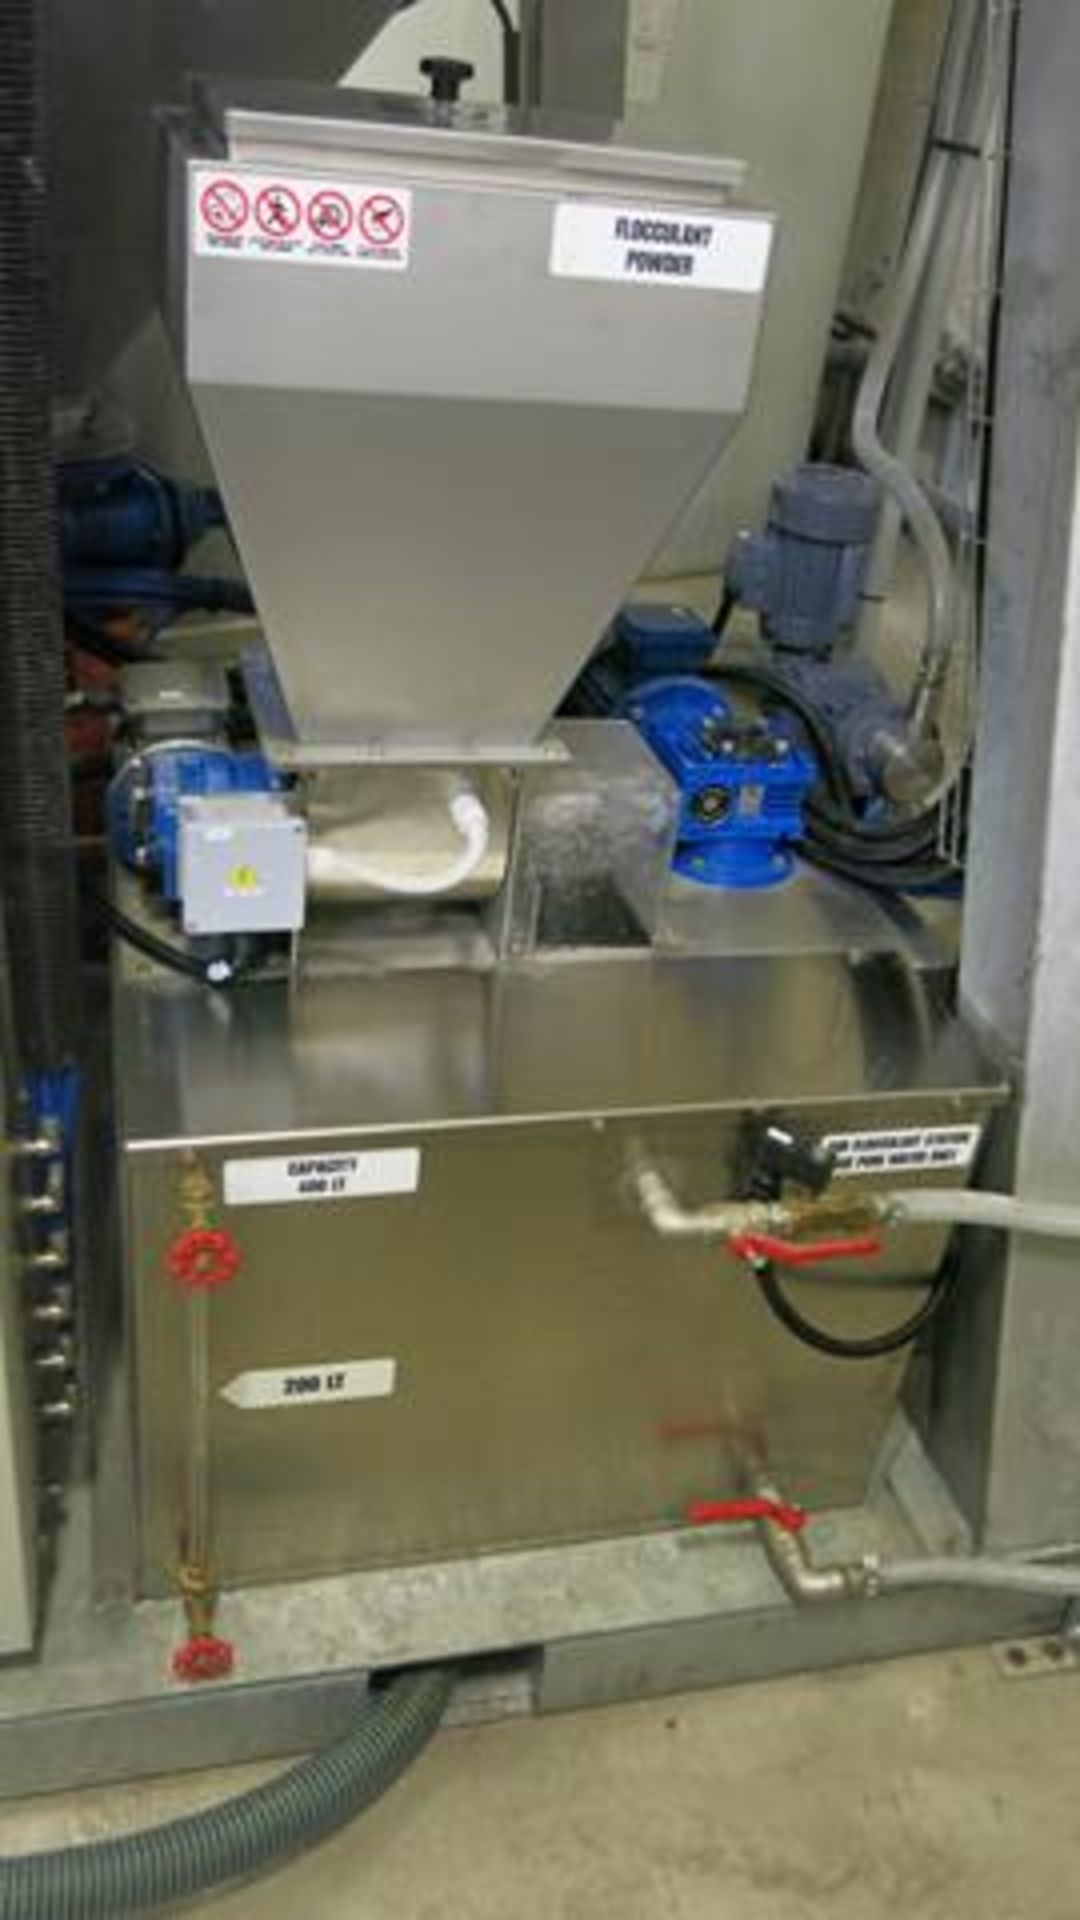 DAL PRETE, MINI COMPACT 3.0, WASTEWATER TREATMENT SYSTEM, S/N 121-19, 2019,(RIGGING $4650), $150,000 - Image 5 of 13